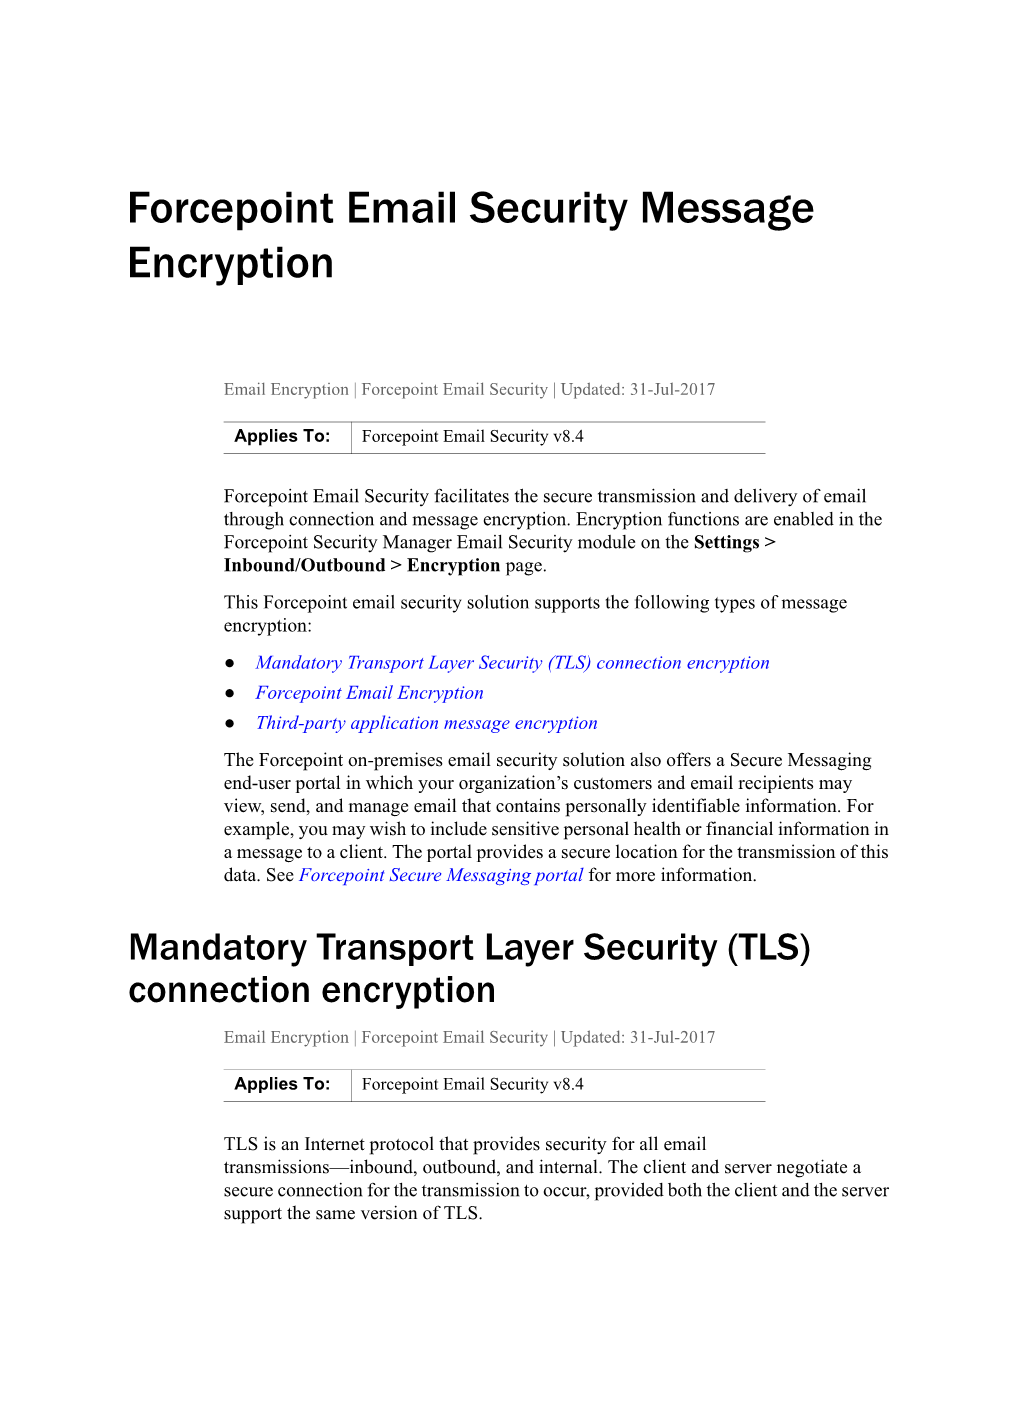 Forcepoint Email Security Message Encryption